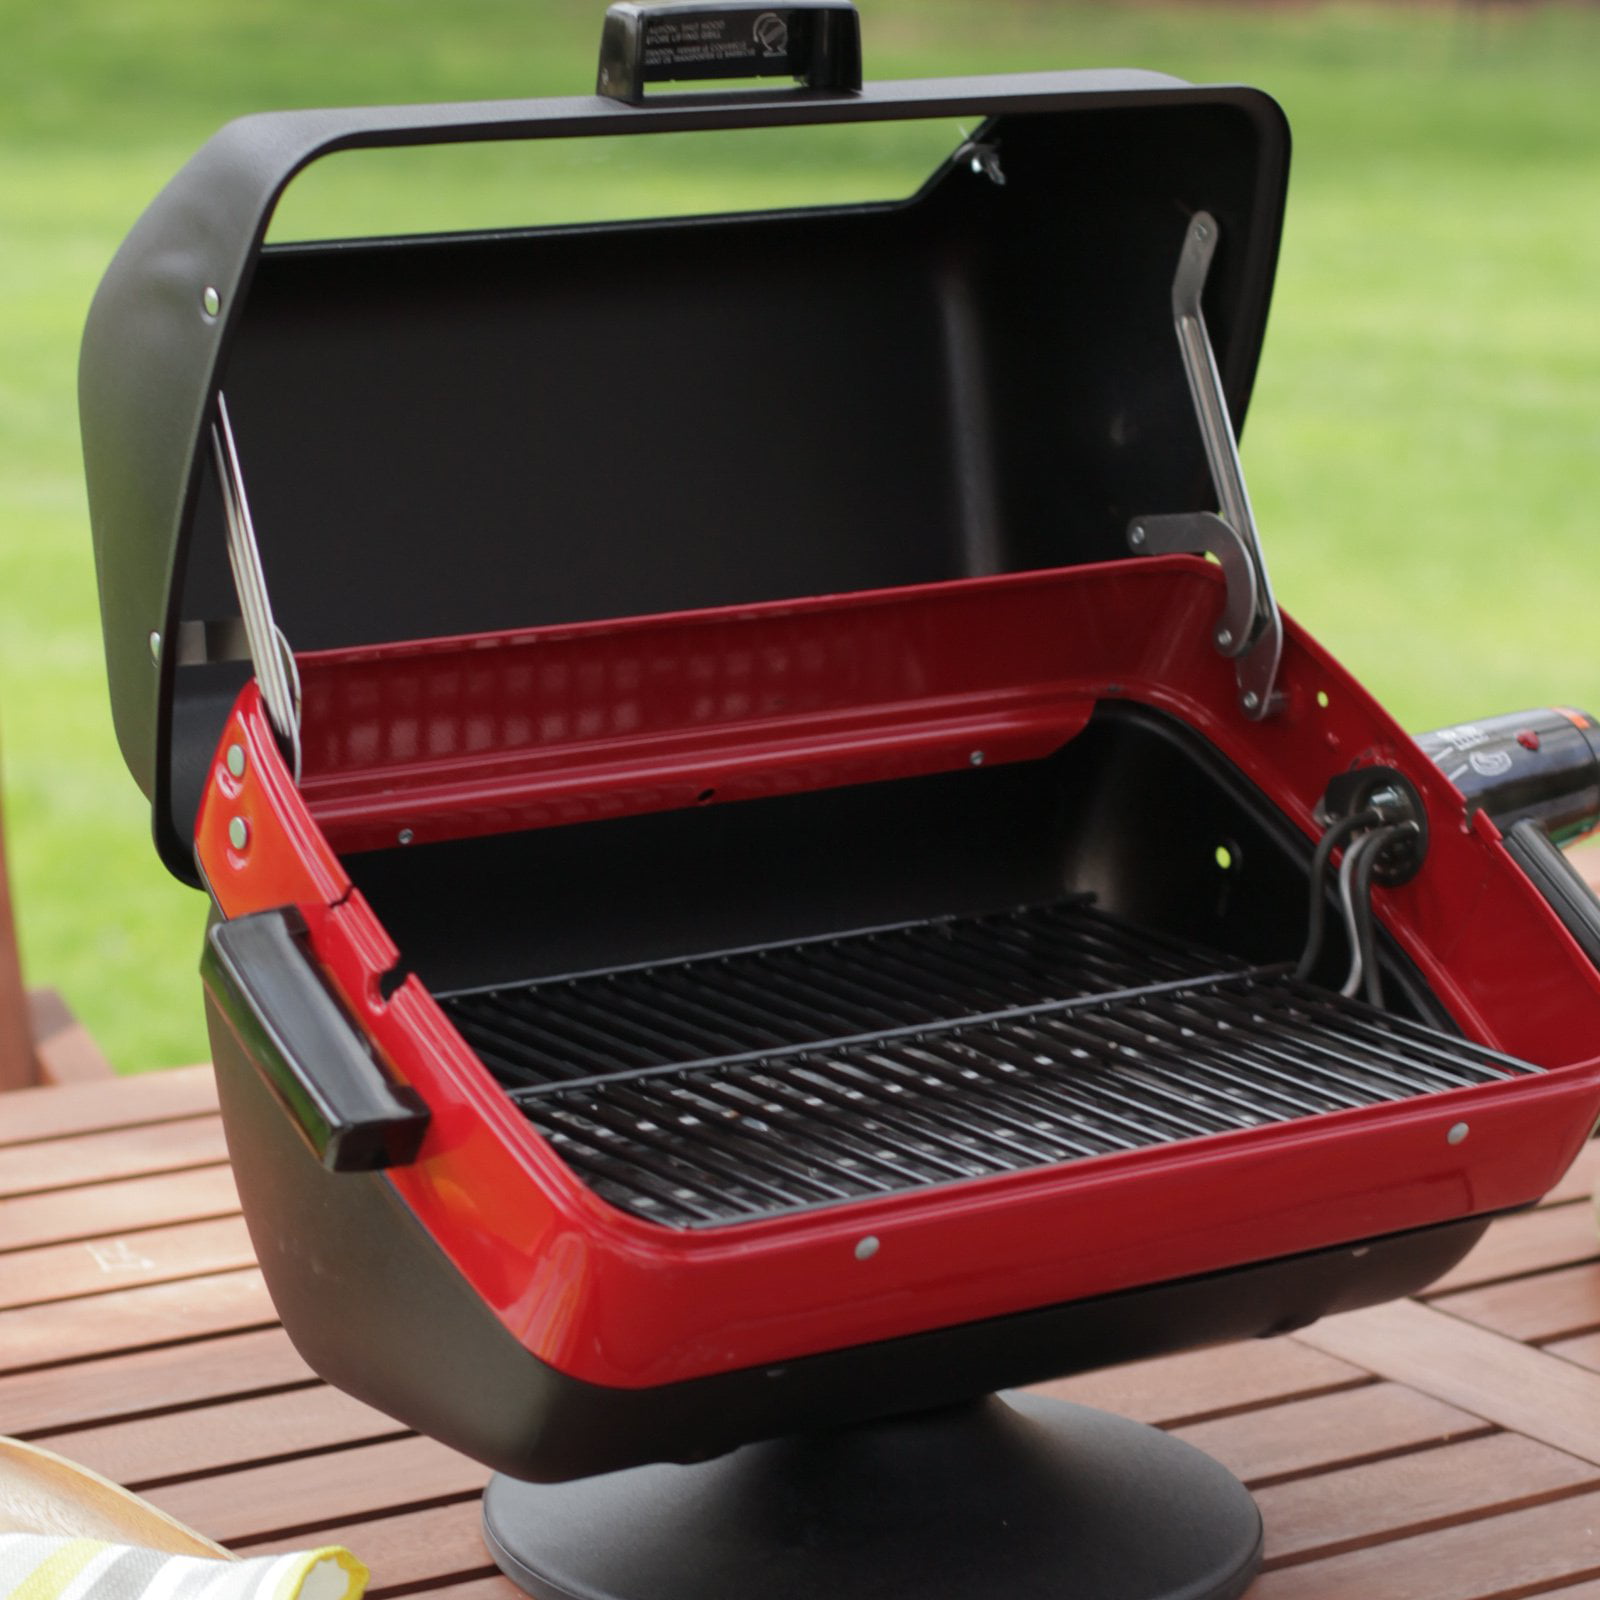 Electric Grill BBQ Rotissary Outdoor Indoor Grilling Nice Meal American Made NEW eBay